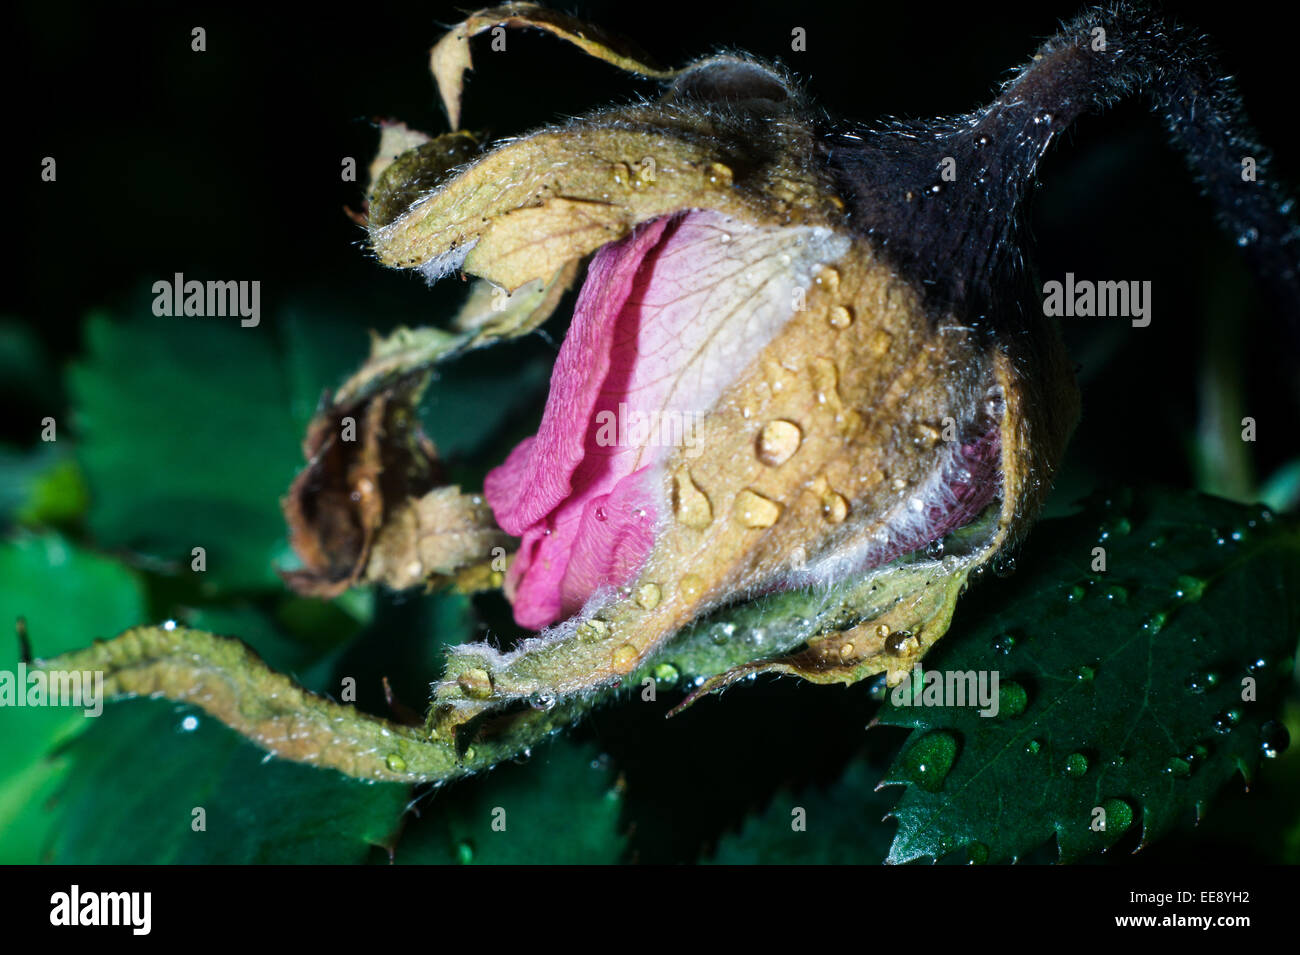 Close up detail of a rose bud wilting and dying. Stock Photo